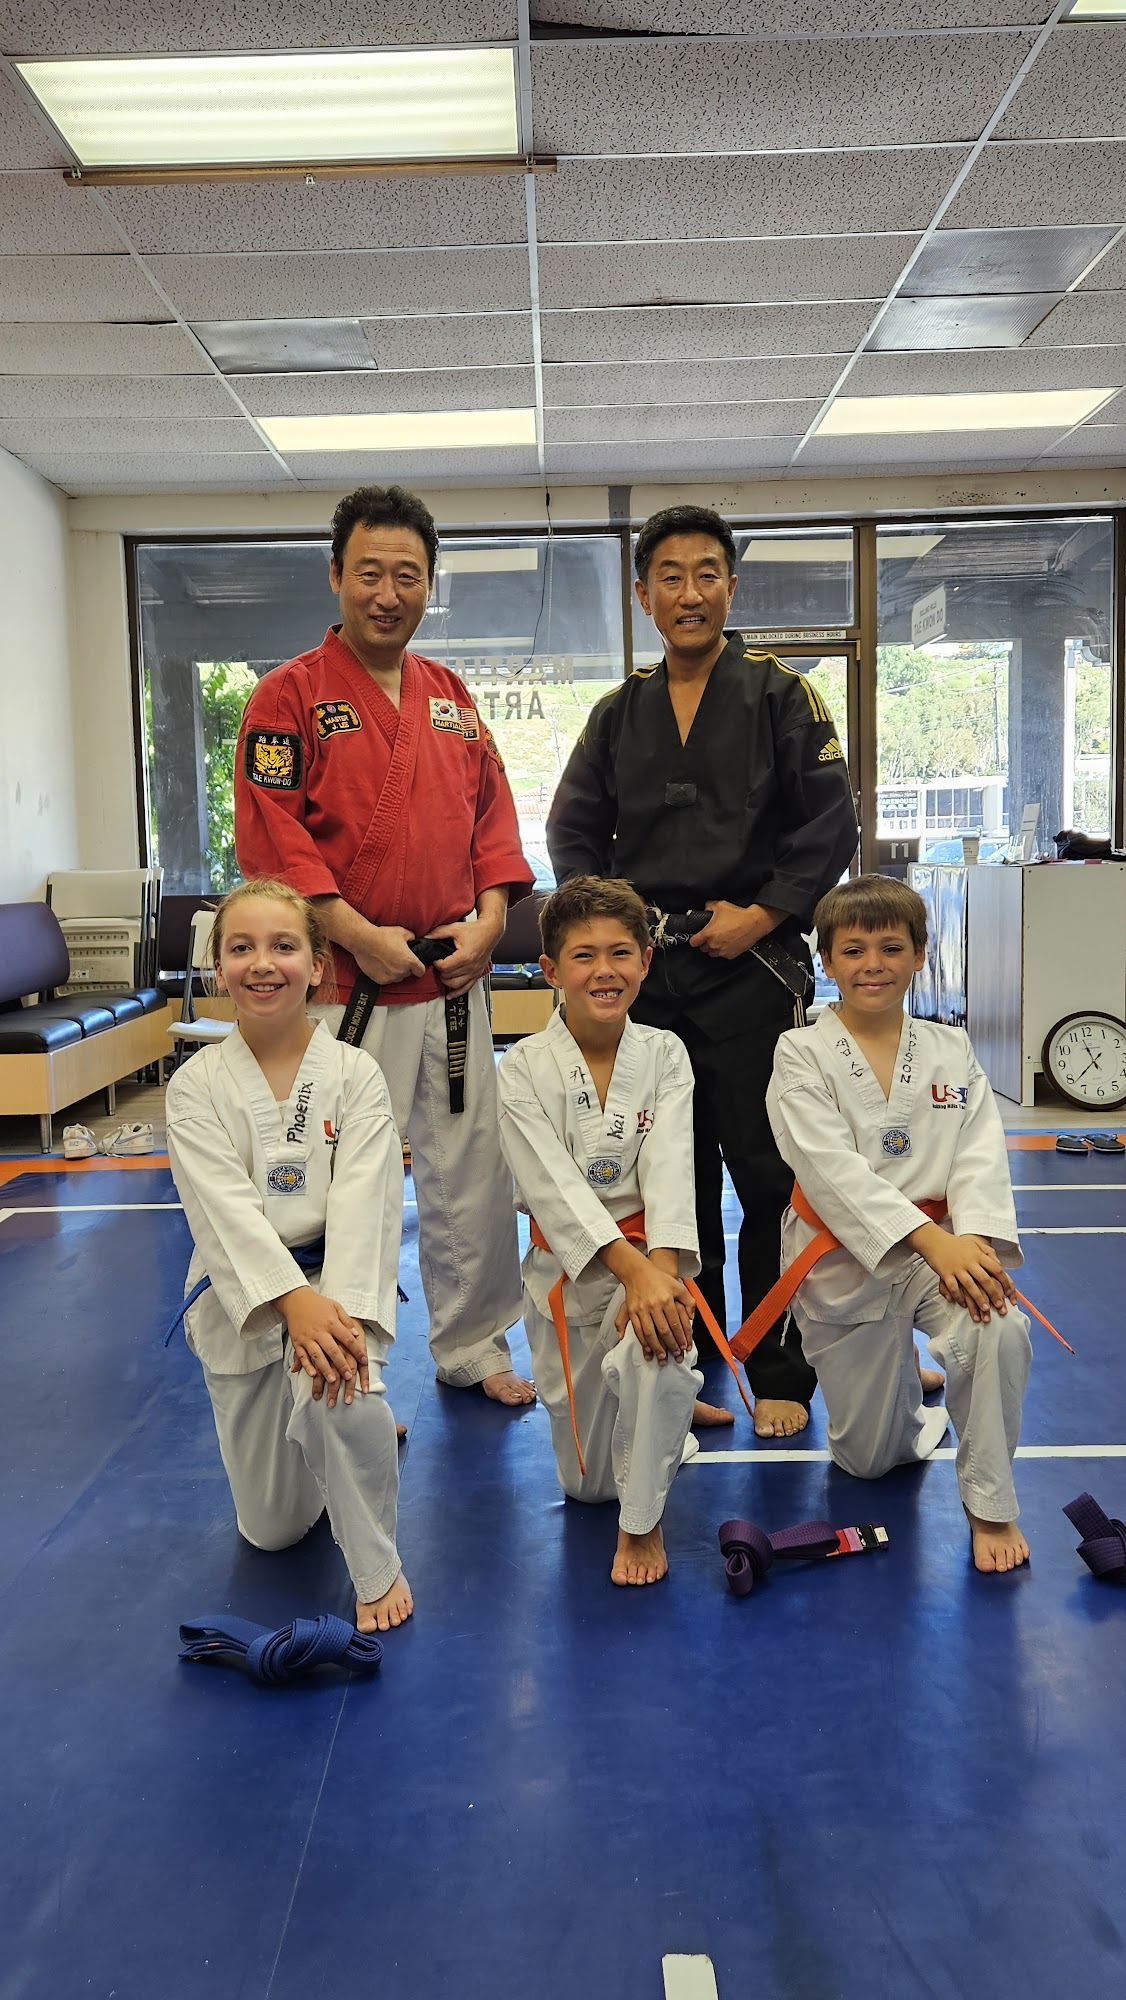 Rolling Hills Tae Kwon Do - Masters United 889 Silver Spur Rd, Rolling Hills Estates California 90274